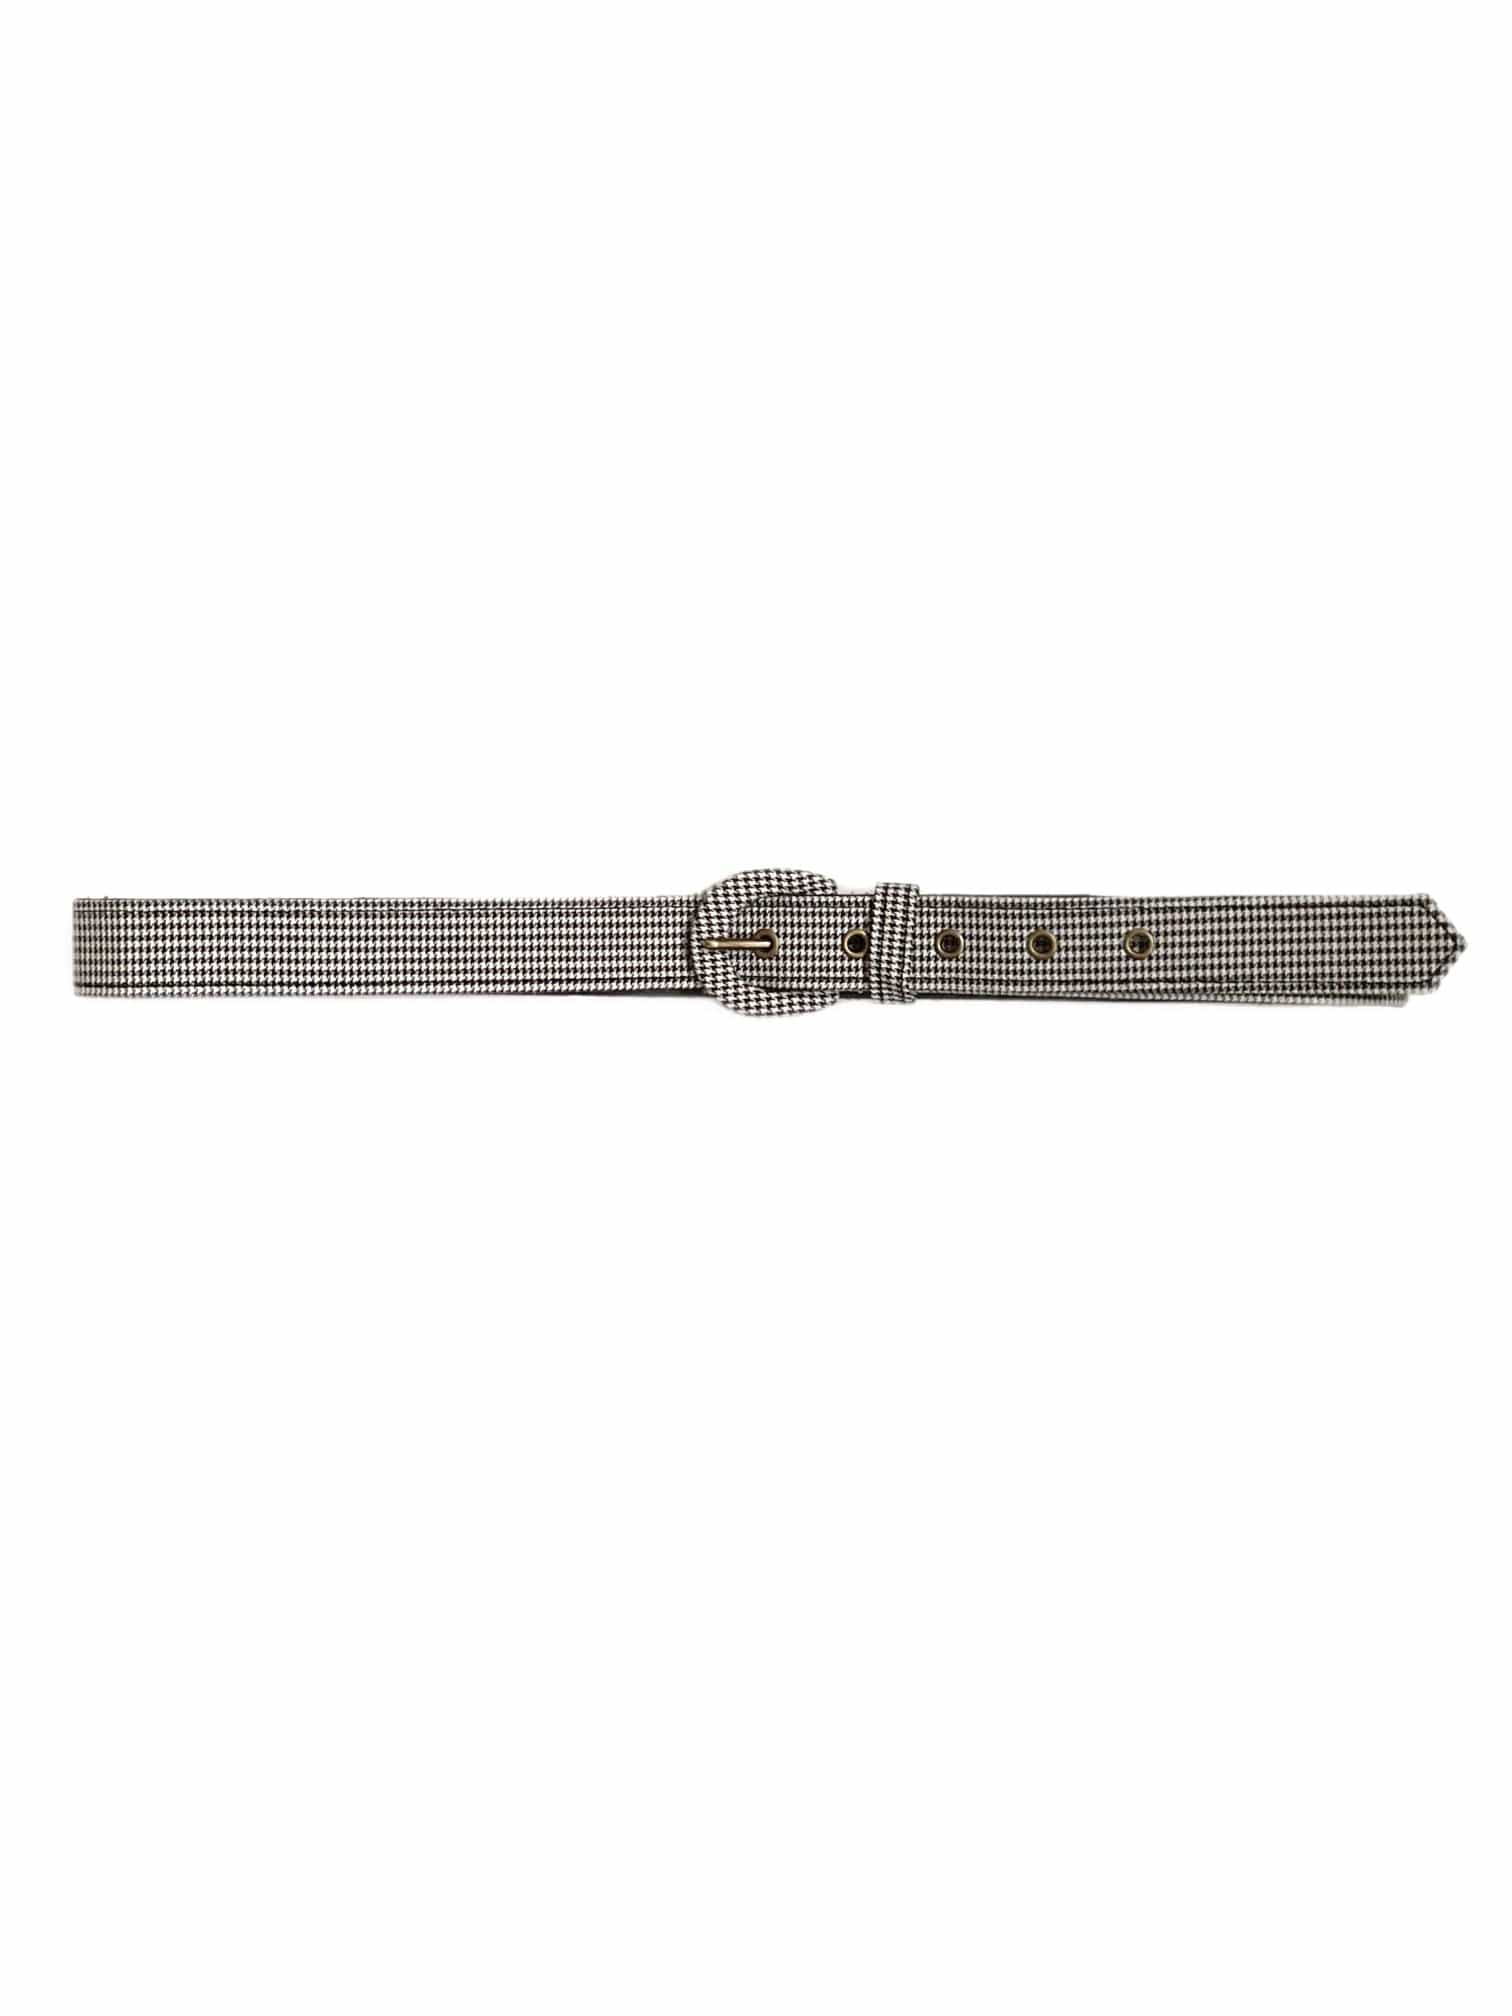 Narrow Belt for Nature vs Nurture Collection Belts CHRISTINE ALCALAY Tiny Houndstooth (Cotton) Extra Small 